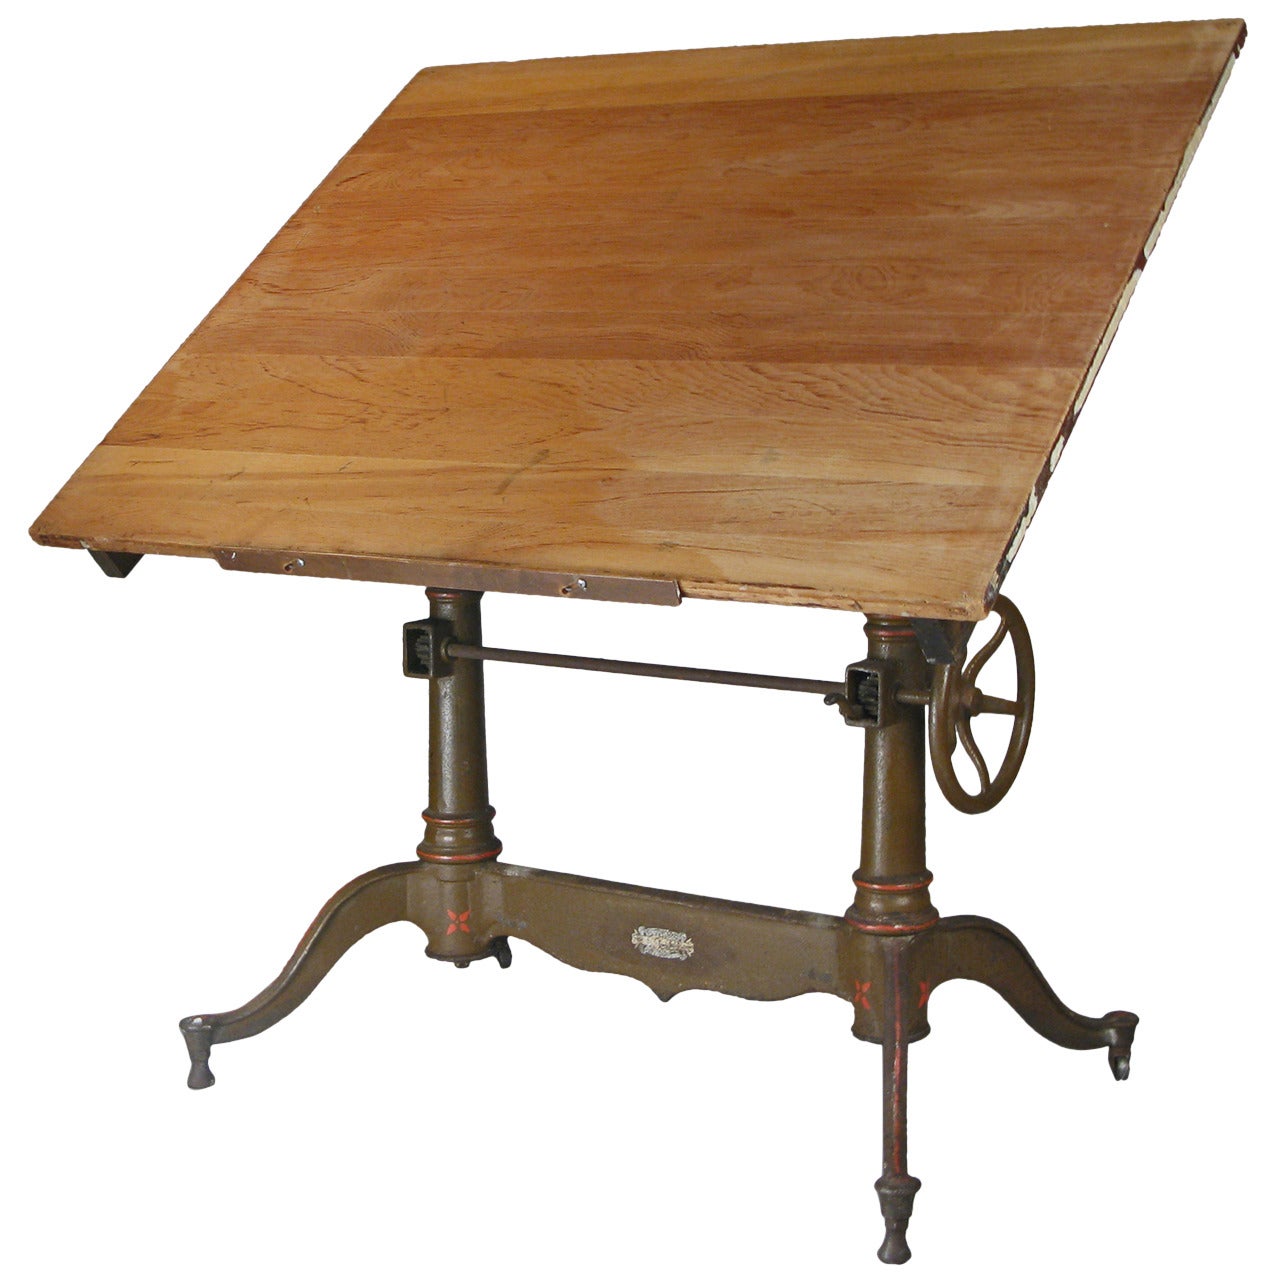 Antique Industrial Cast Iron Adjustable Drafting Table